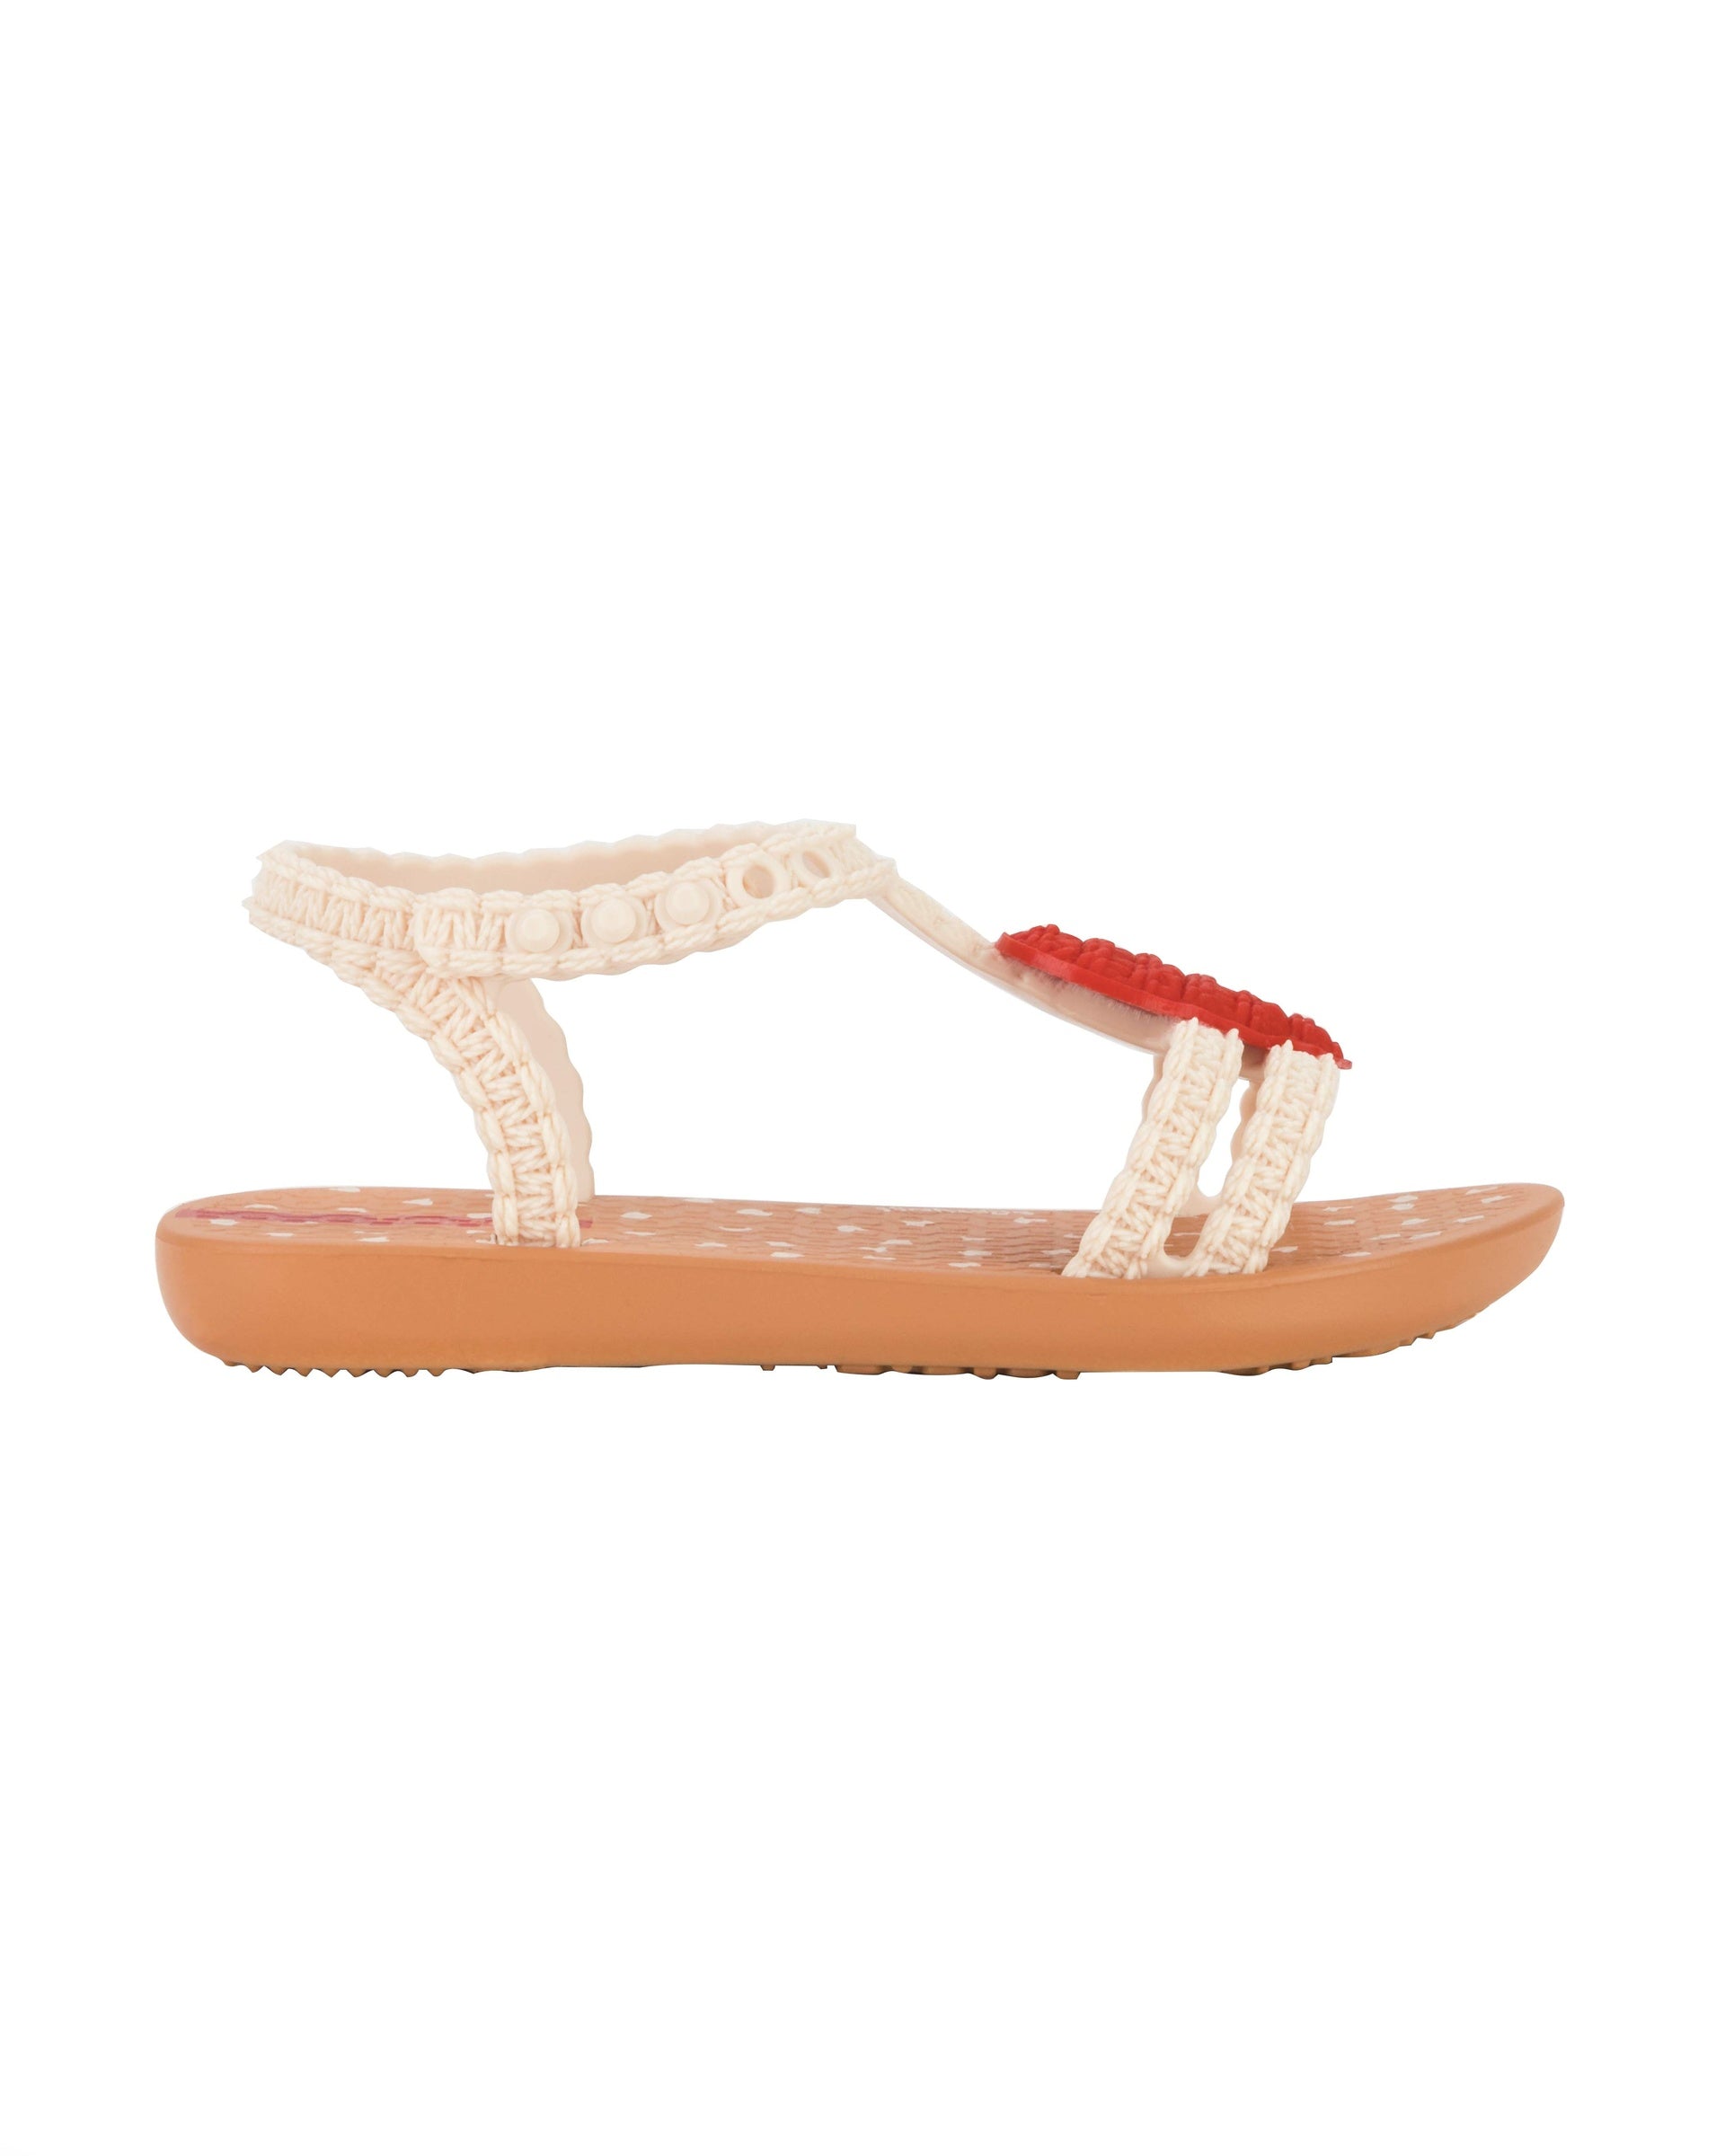 Outer side view of a beige Ipanema My First Ipanema baby sandal with red heart on top and crochet texture .